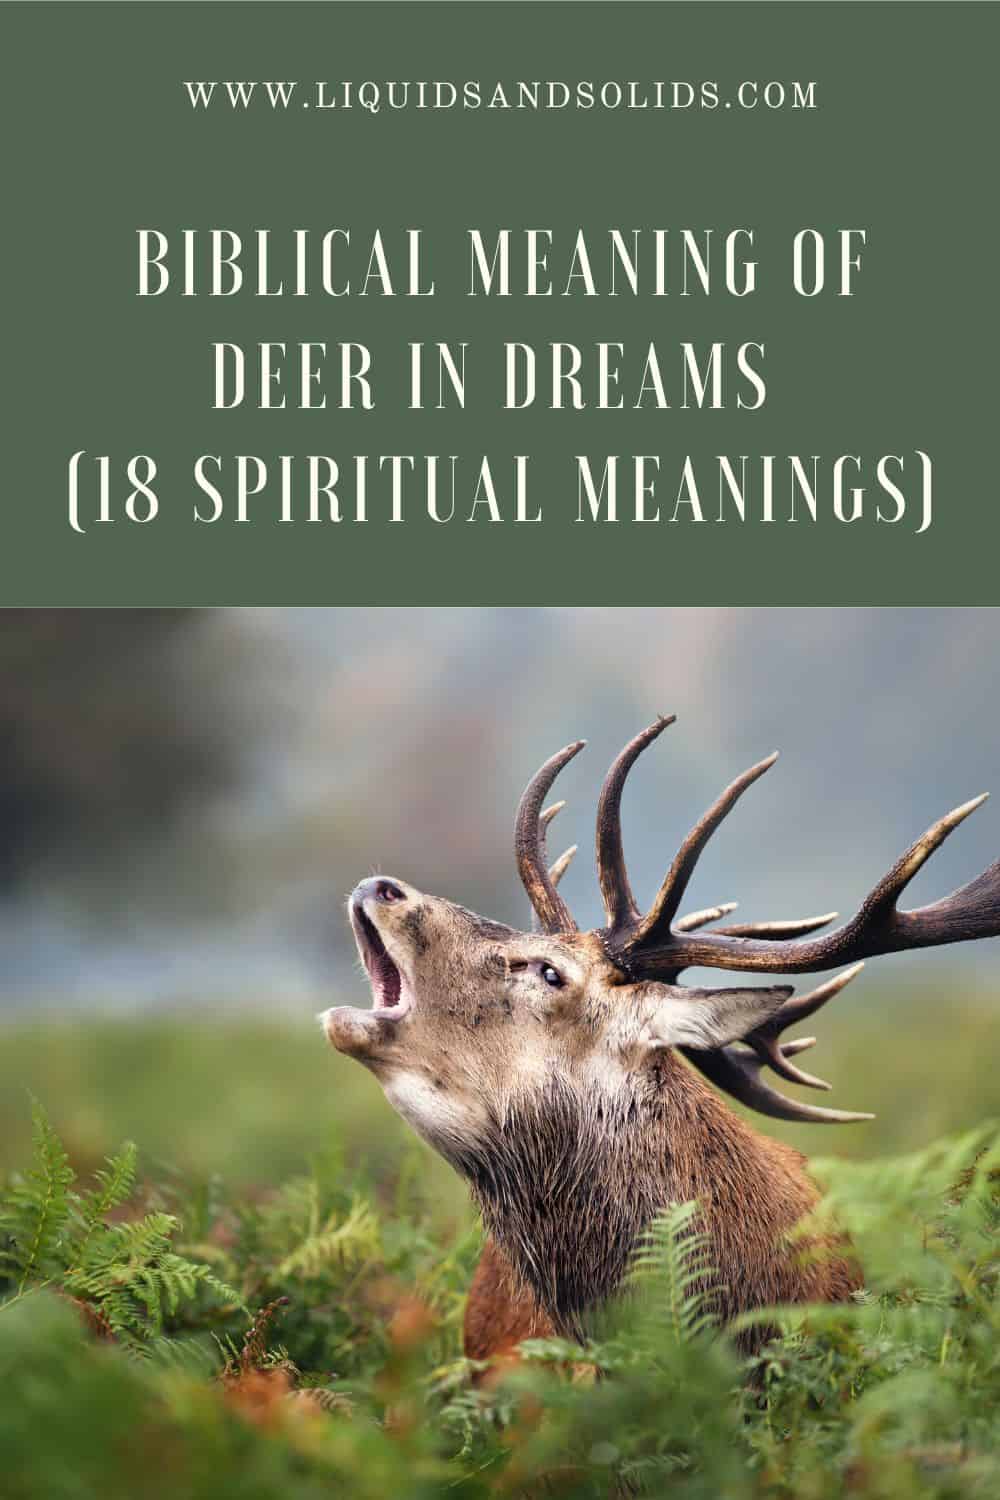 Biblical Meaning of Dreams about Deer